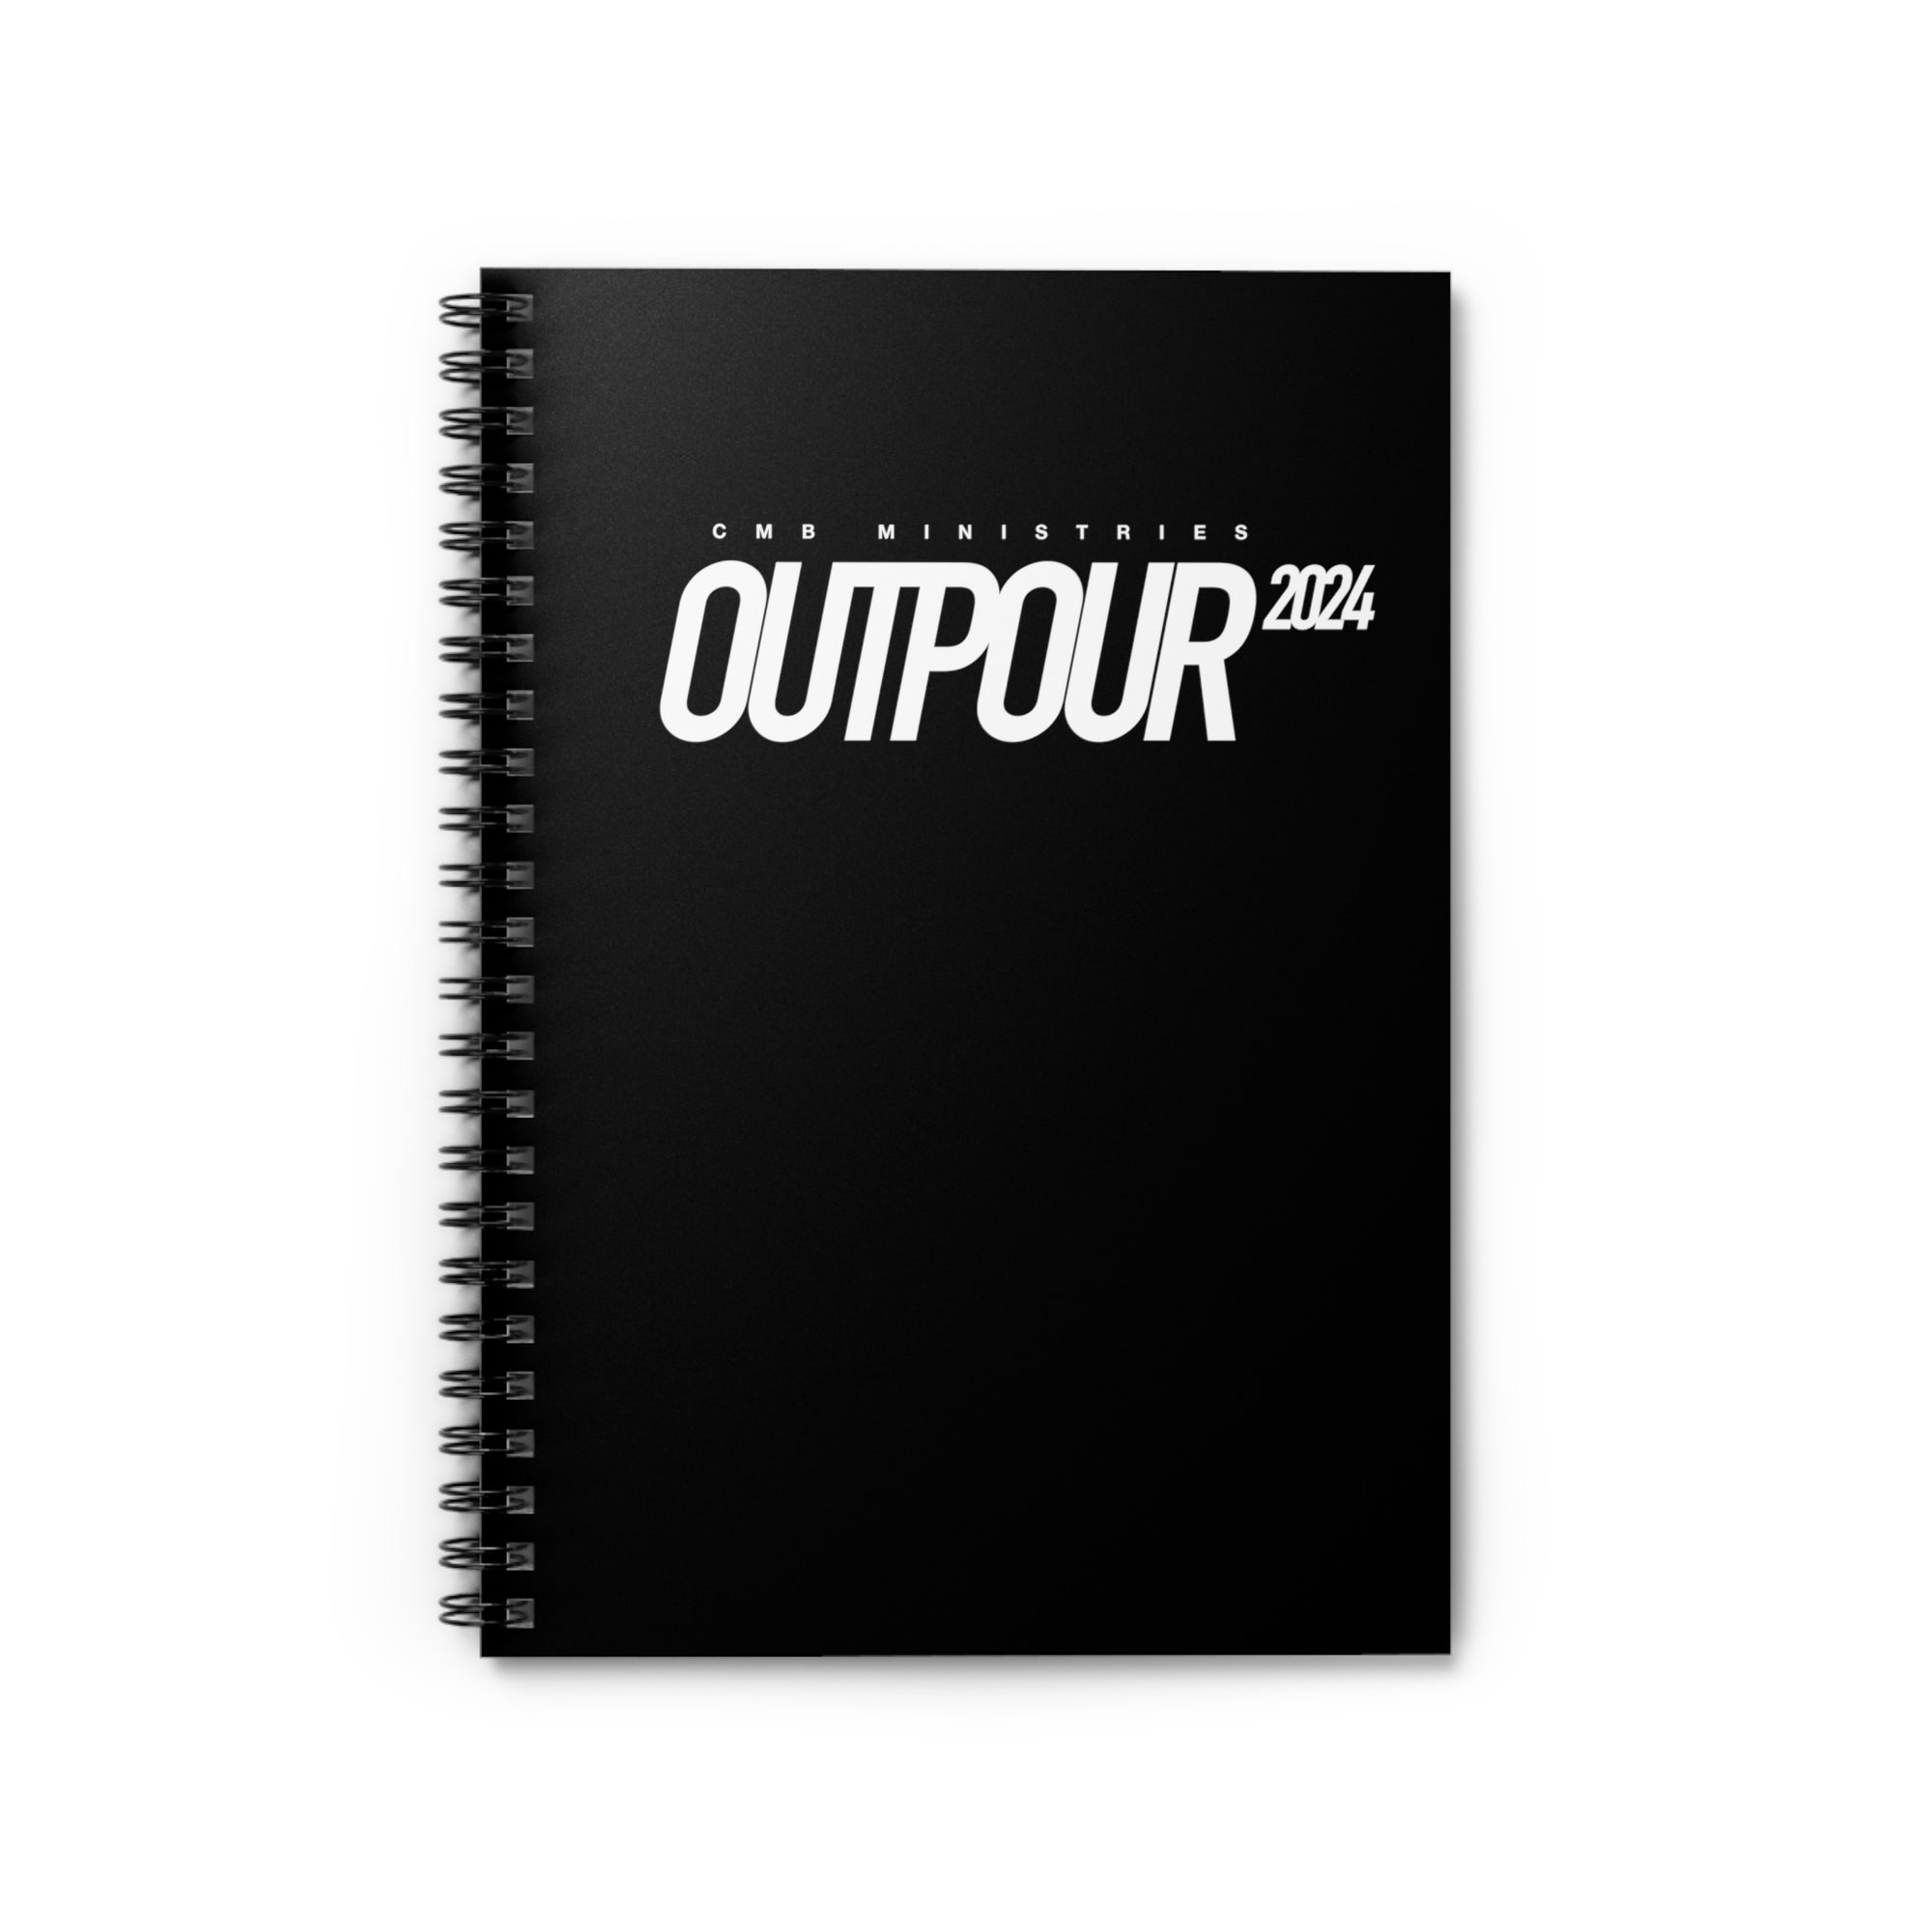 Outpour 2024 - Spiral Notebook - Ruled Line